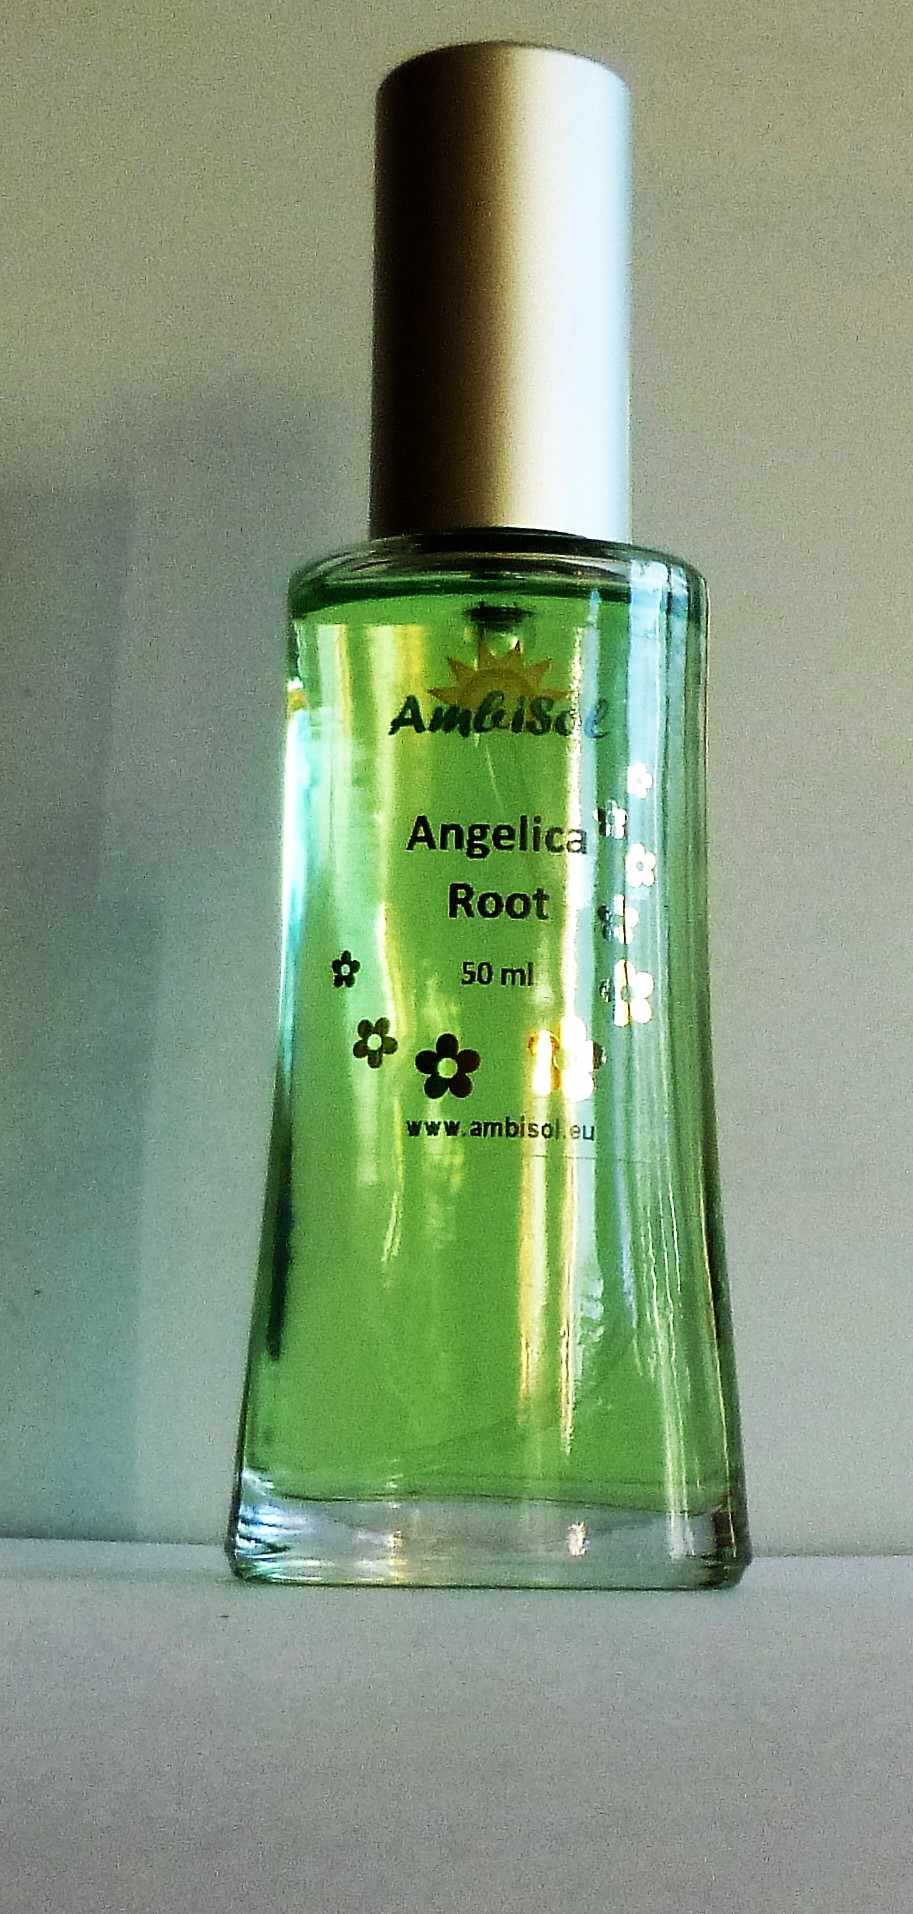 angelica root spray